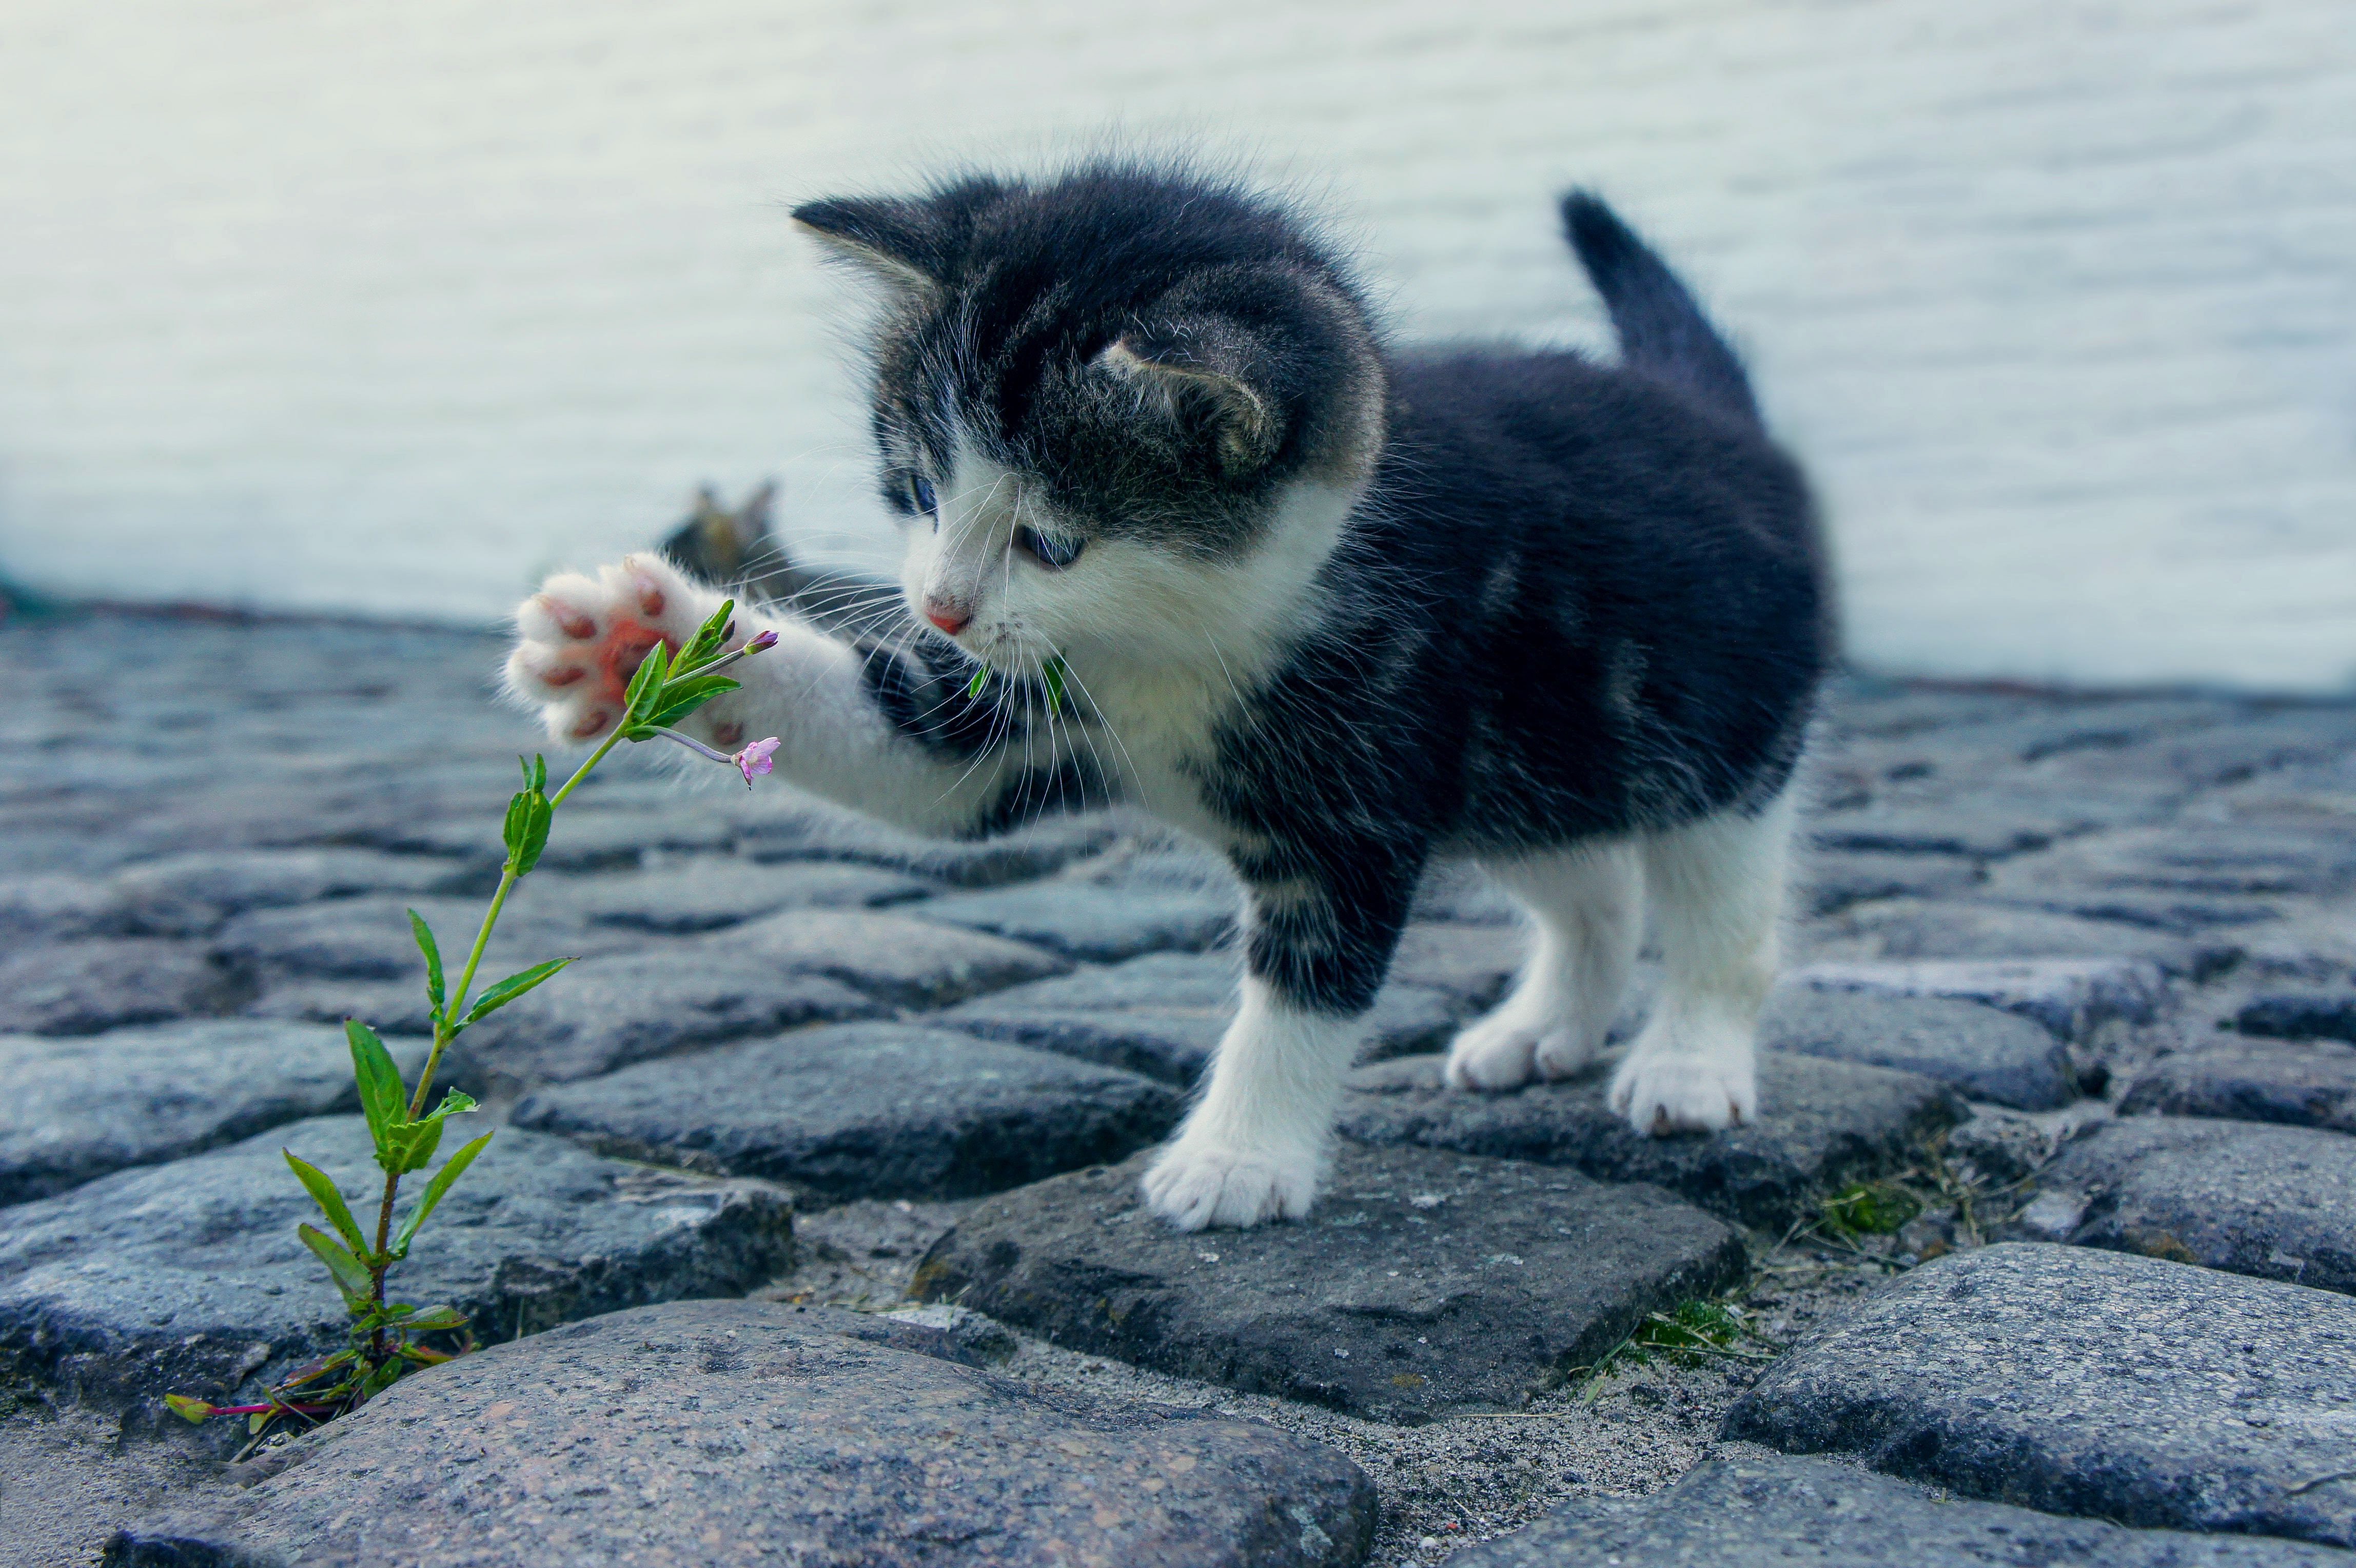 Kitten playing with a plant. Representing observables.